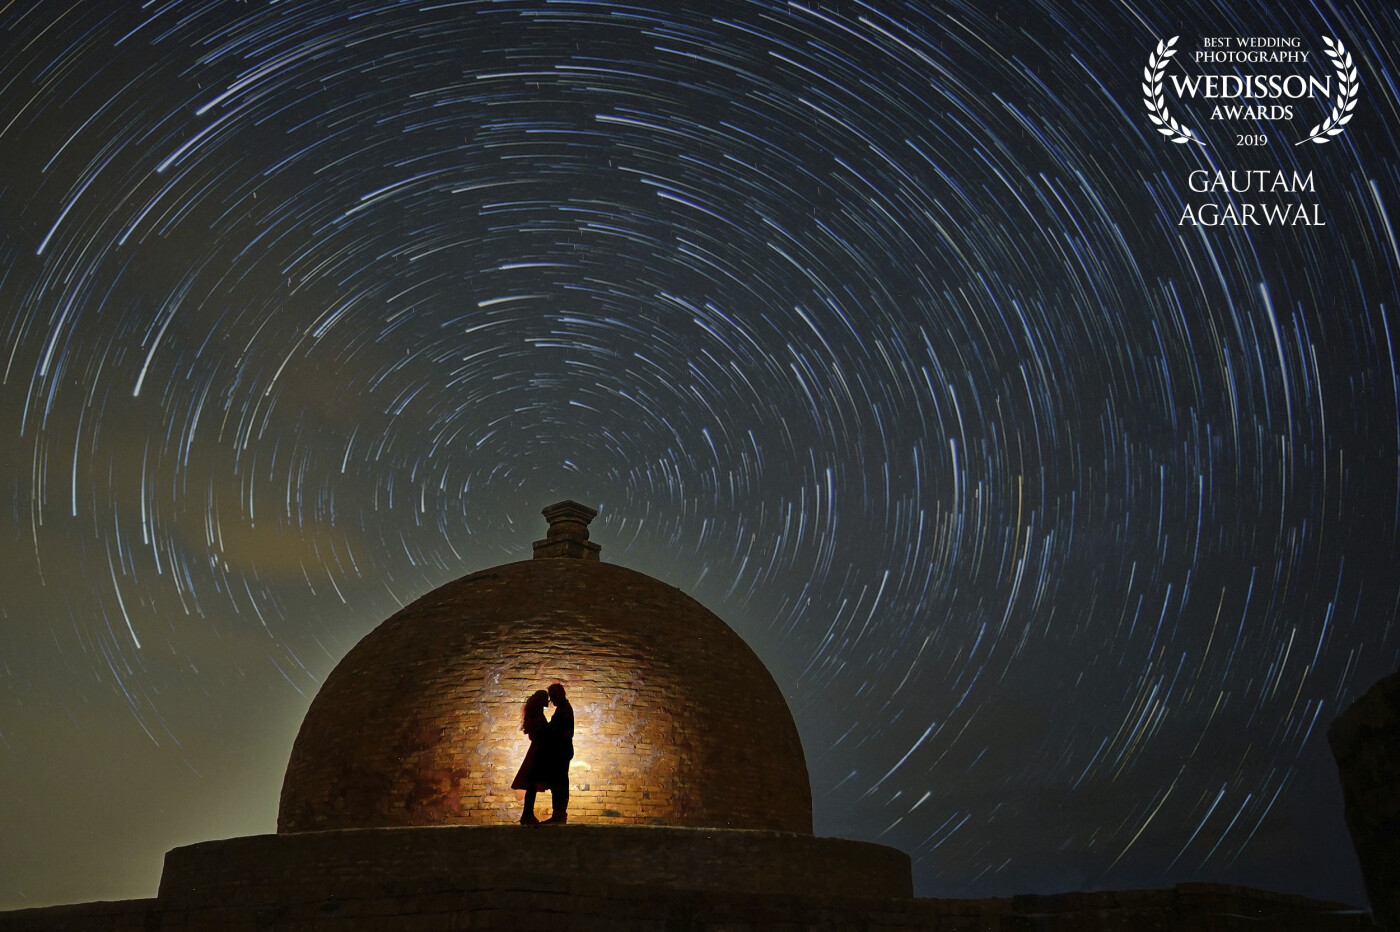 Thank you so much for recognising my work. I wanted to give something out of the ordinary to this couple. This building ( a Buddhist Stupa) has been our city's heritage and the sky was filled with stars. So the thought of a star trail portrait triggered